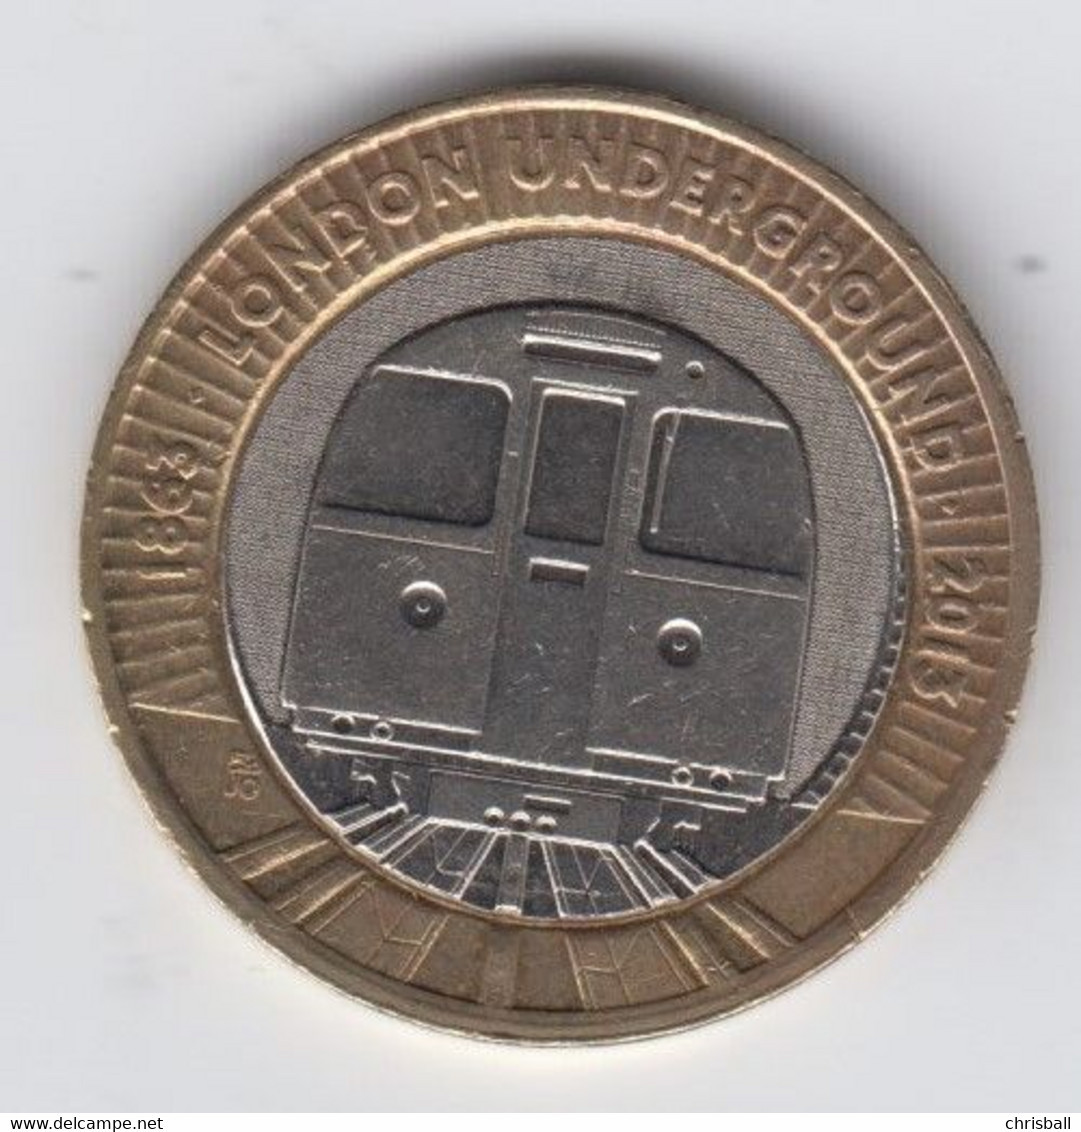 Great Britain UK £2 Two Pound Coin Train) - Circulated - 2 Pounds